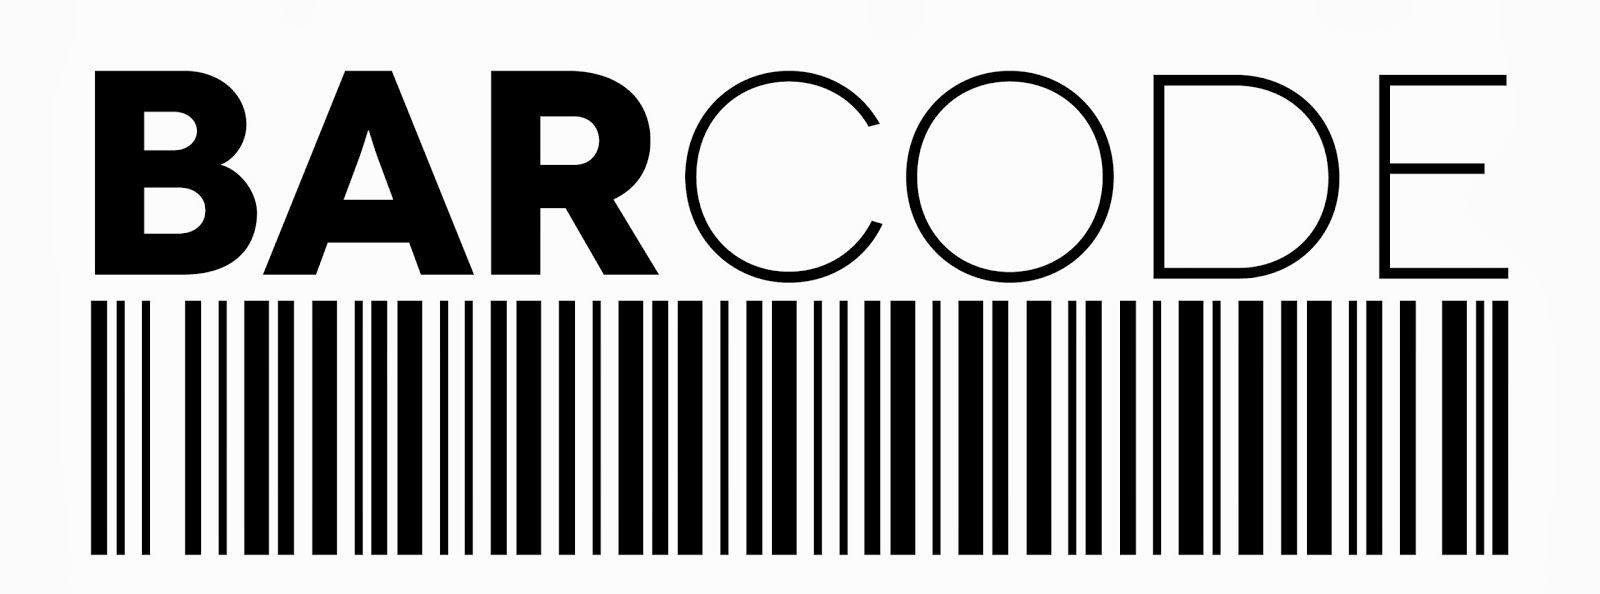 Where can get the barcode for your products on a budget? | Gifts And ...